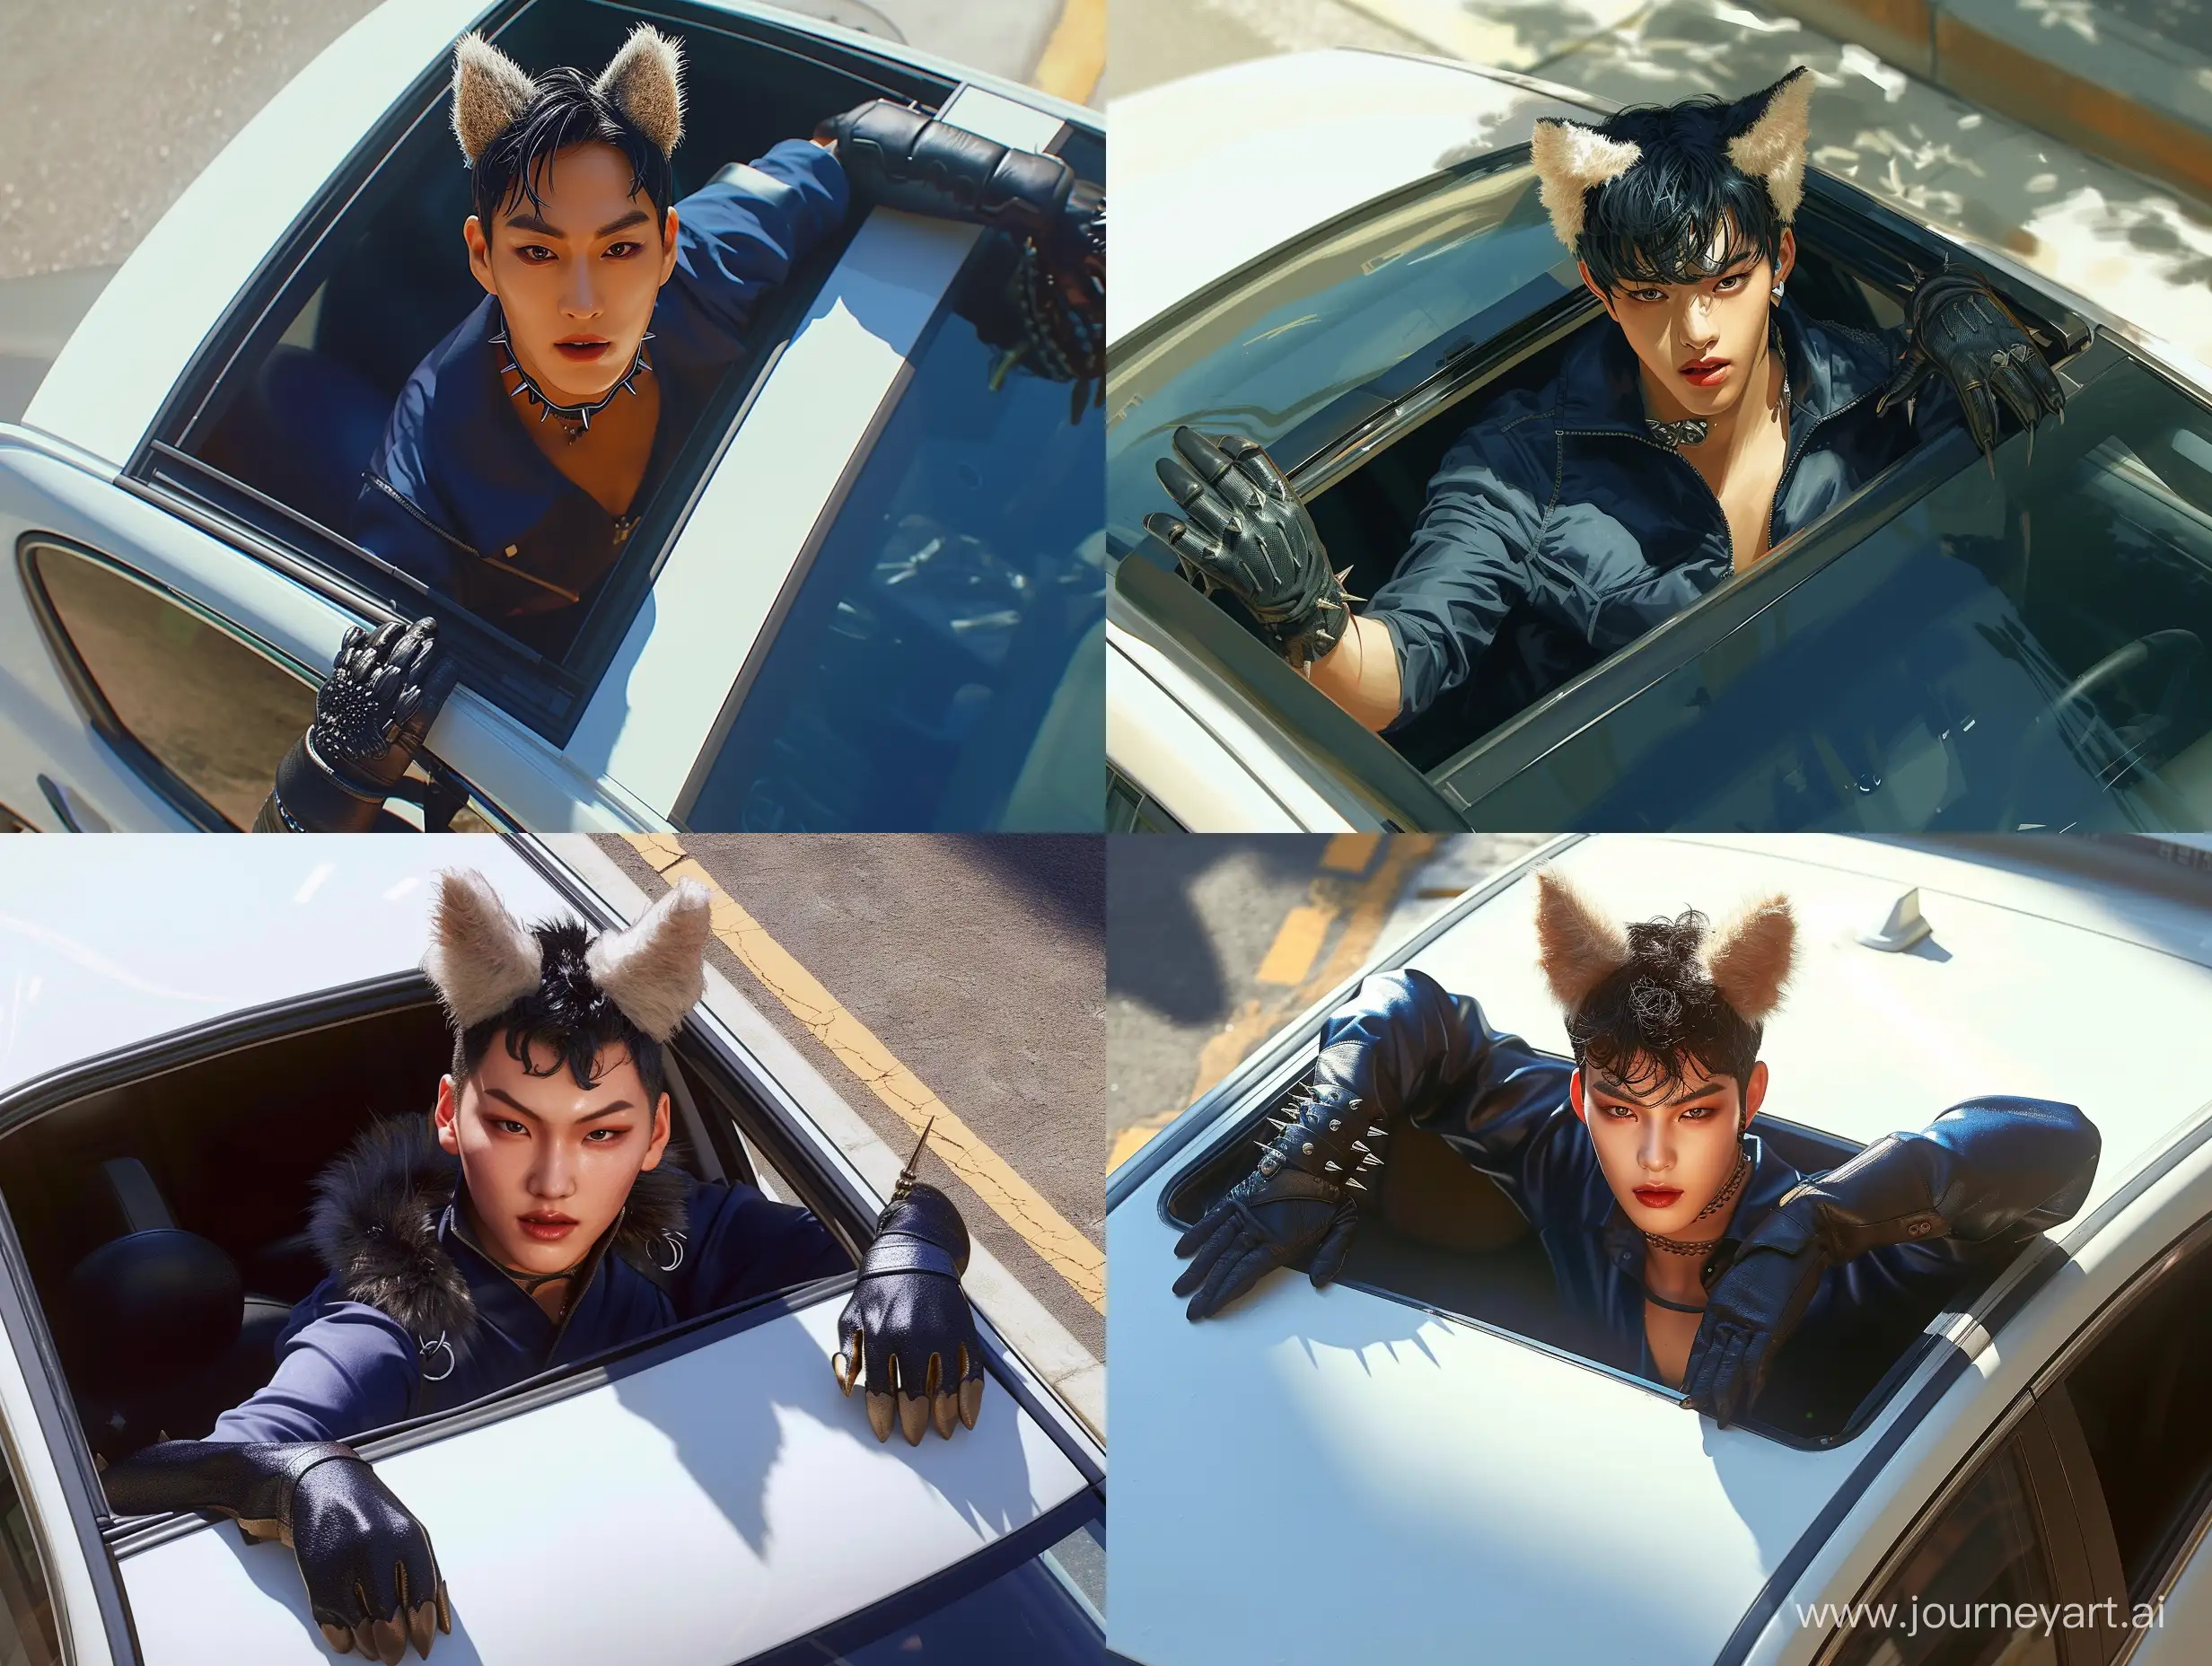 The image shows a person emerging from the sunroof of a car. The face of the man with masculine features of the Star Bang Chang from South Korea has small eyes, a straight and prominent nose, dimples on the cheeks, heart-shaped lips, uniform and full, the cupid's bow is that small space between the upper lip and the nose, mole on the left eyebrow, broad shoulders. This person wears furry ears exactly like a cat, he wears gloves in the hyperrealism shape of a cat's paws. She is dressed in a dark blue jumpsuit partially pulled down to expose her shoulders and part of her chest with muscular and anabolic parts. He wears black gloves and some kind of spiked collar around his neck. The car is white and appears to be parked next to a curb on a sunny street.